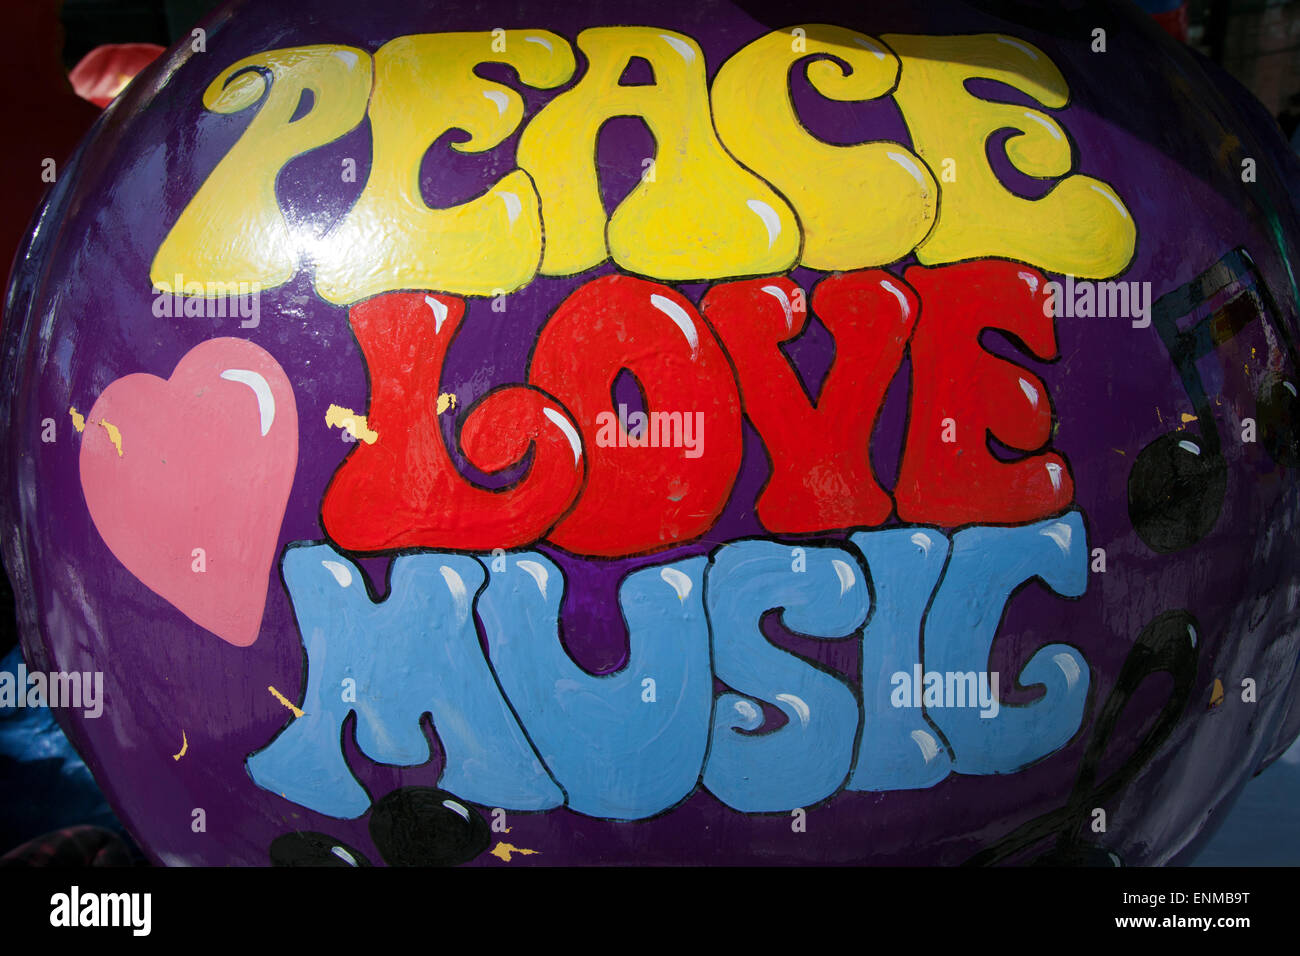 'Peace Love Music' painting at the Duck festival in the foyer of Liverpool's Mann Island, Merseyside, UK Stock Photo